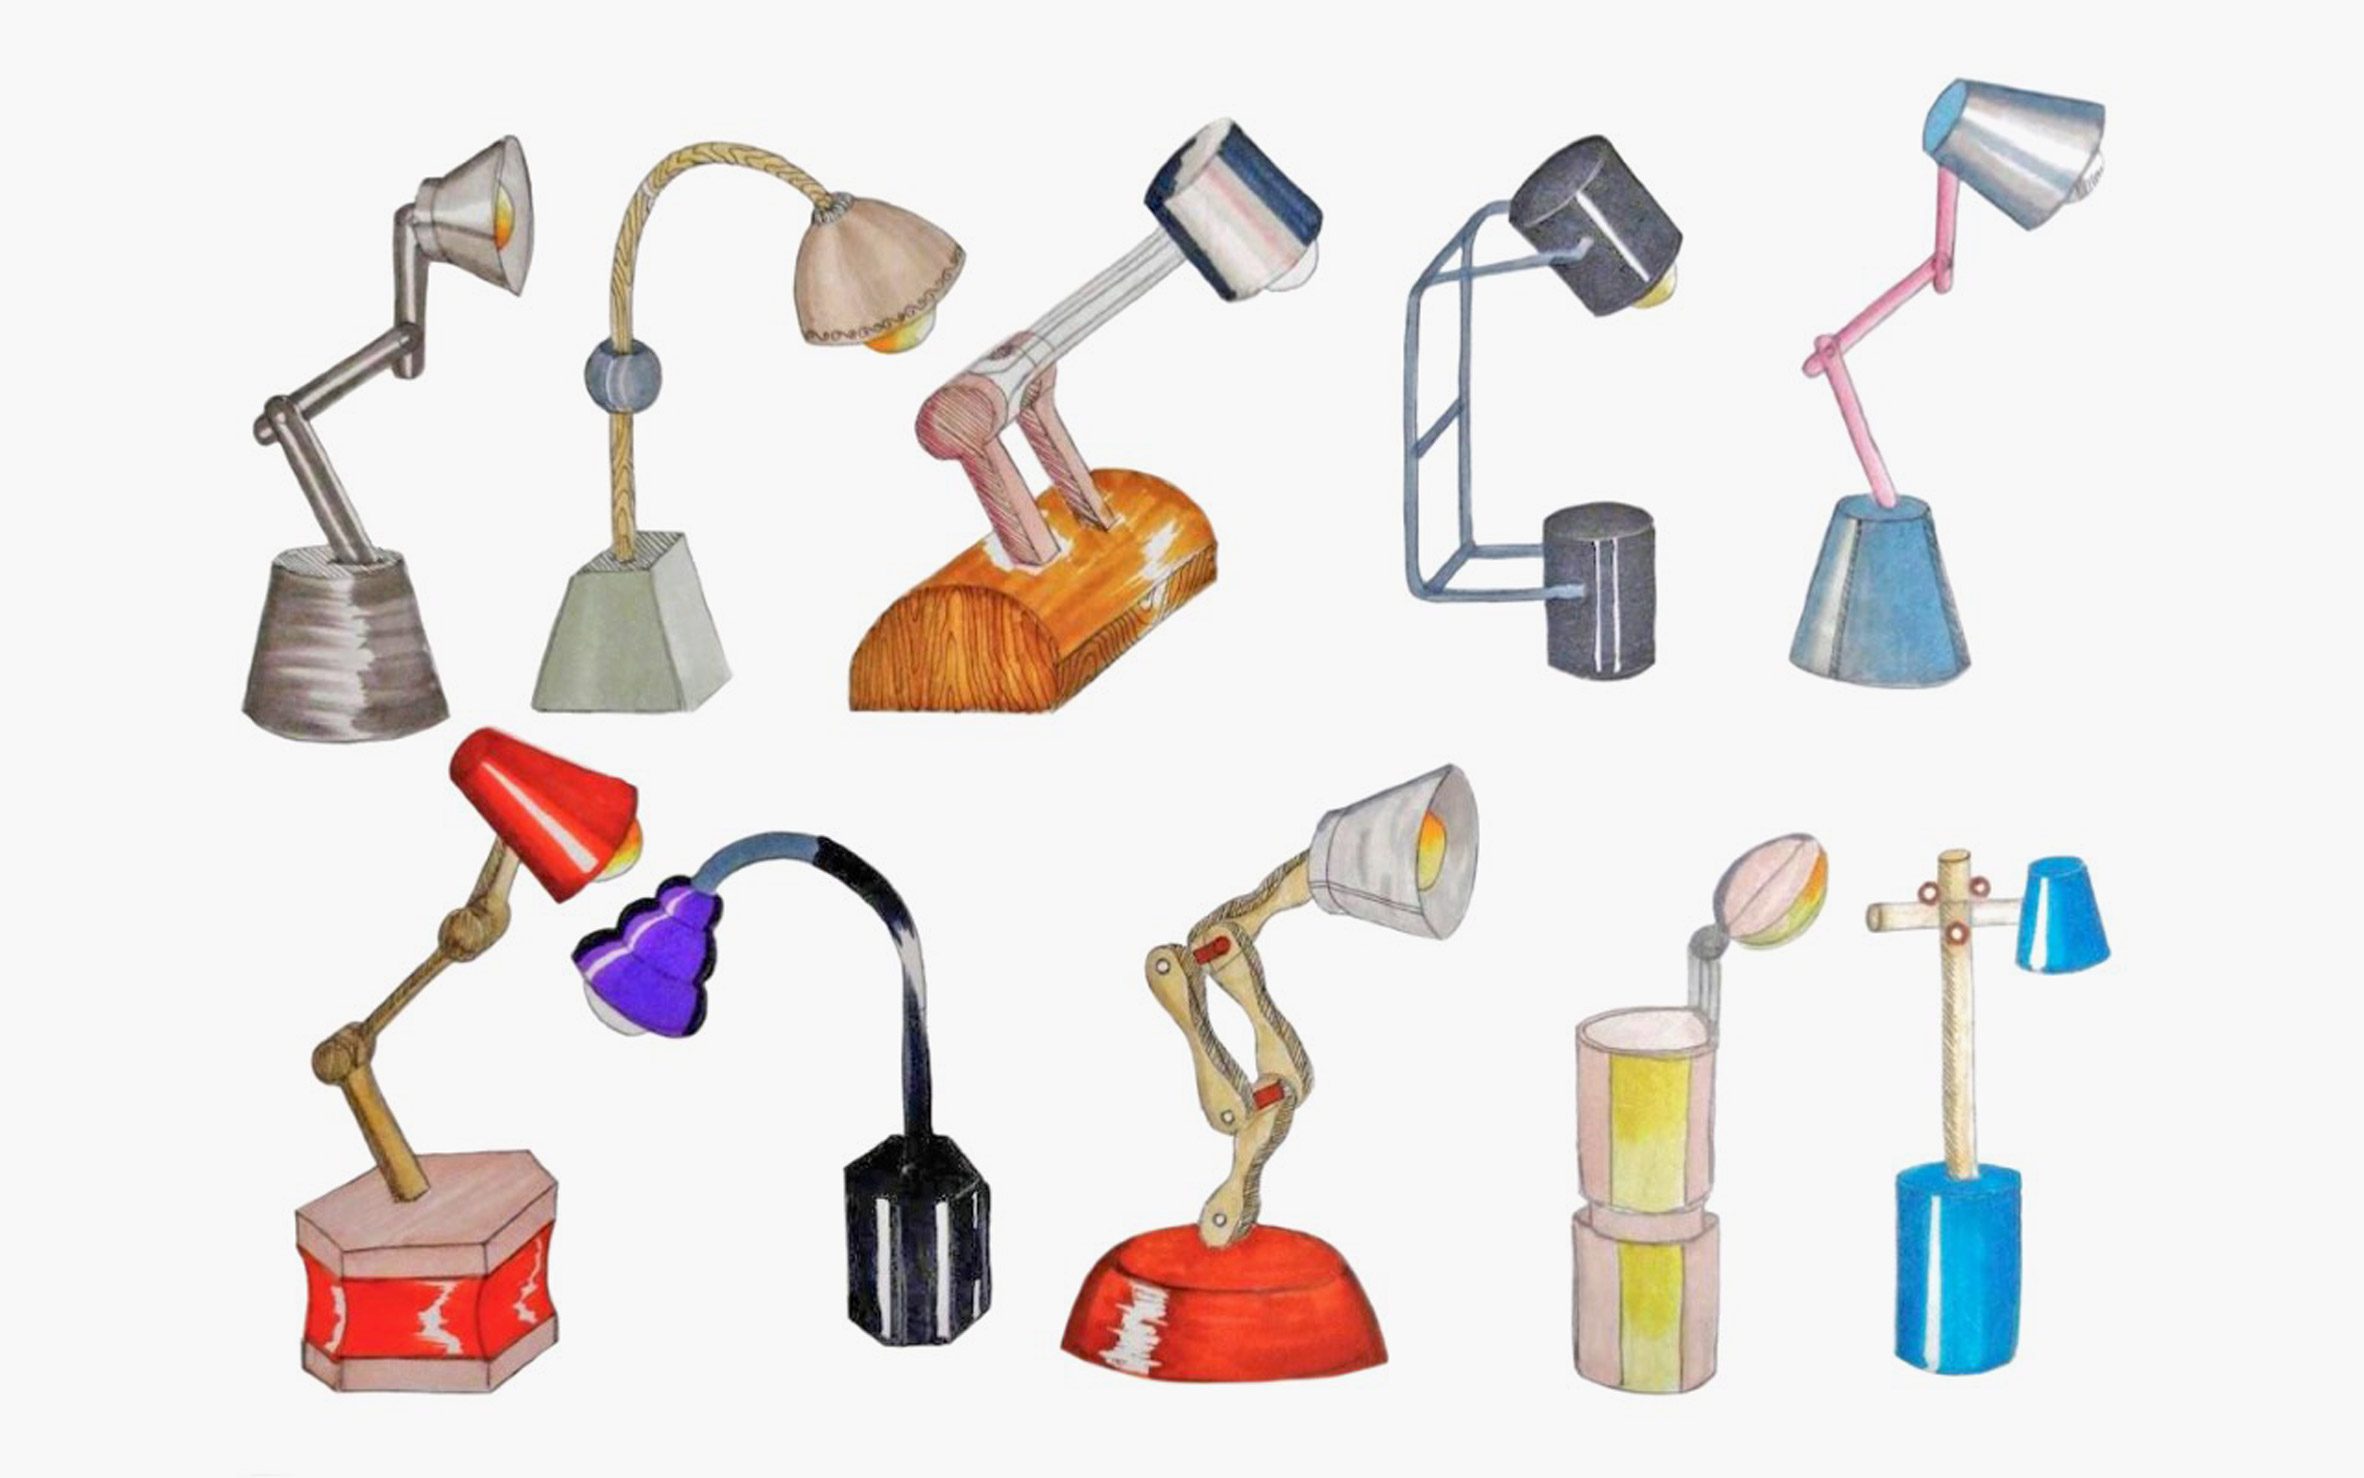 Illustrations of various anglepoise lamp designs